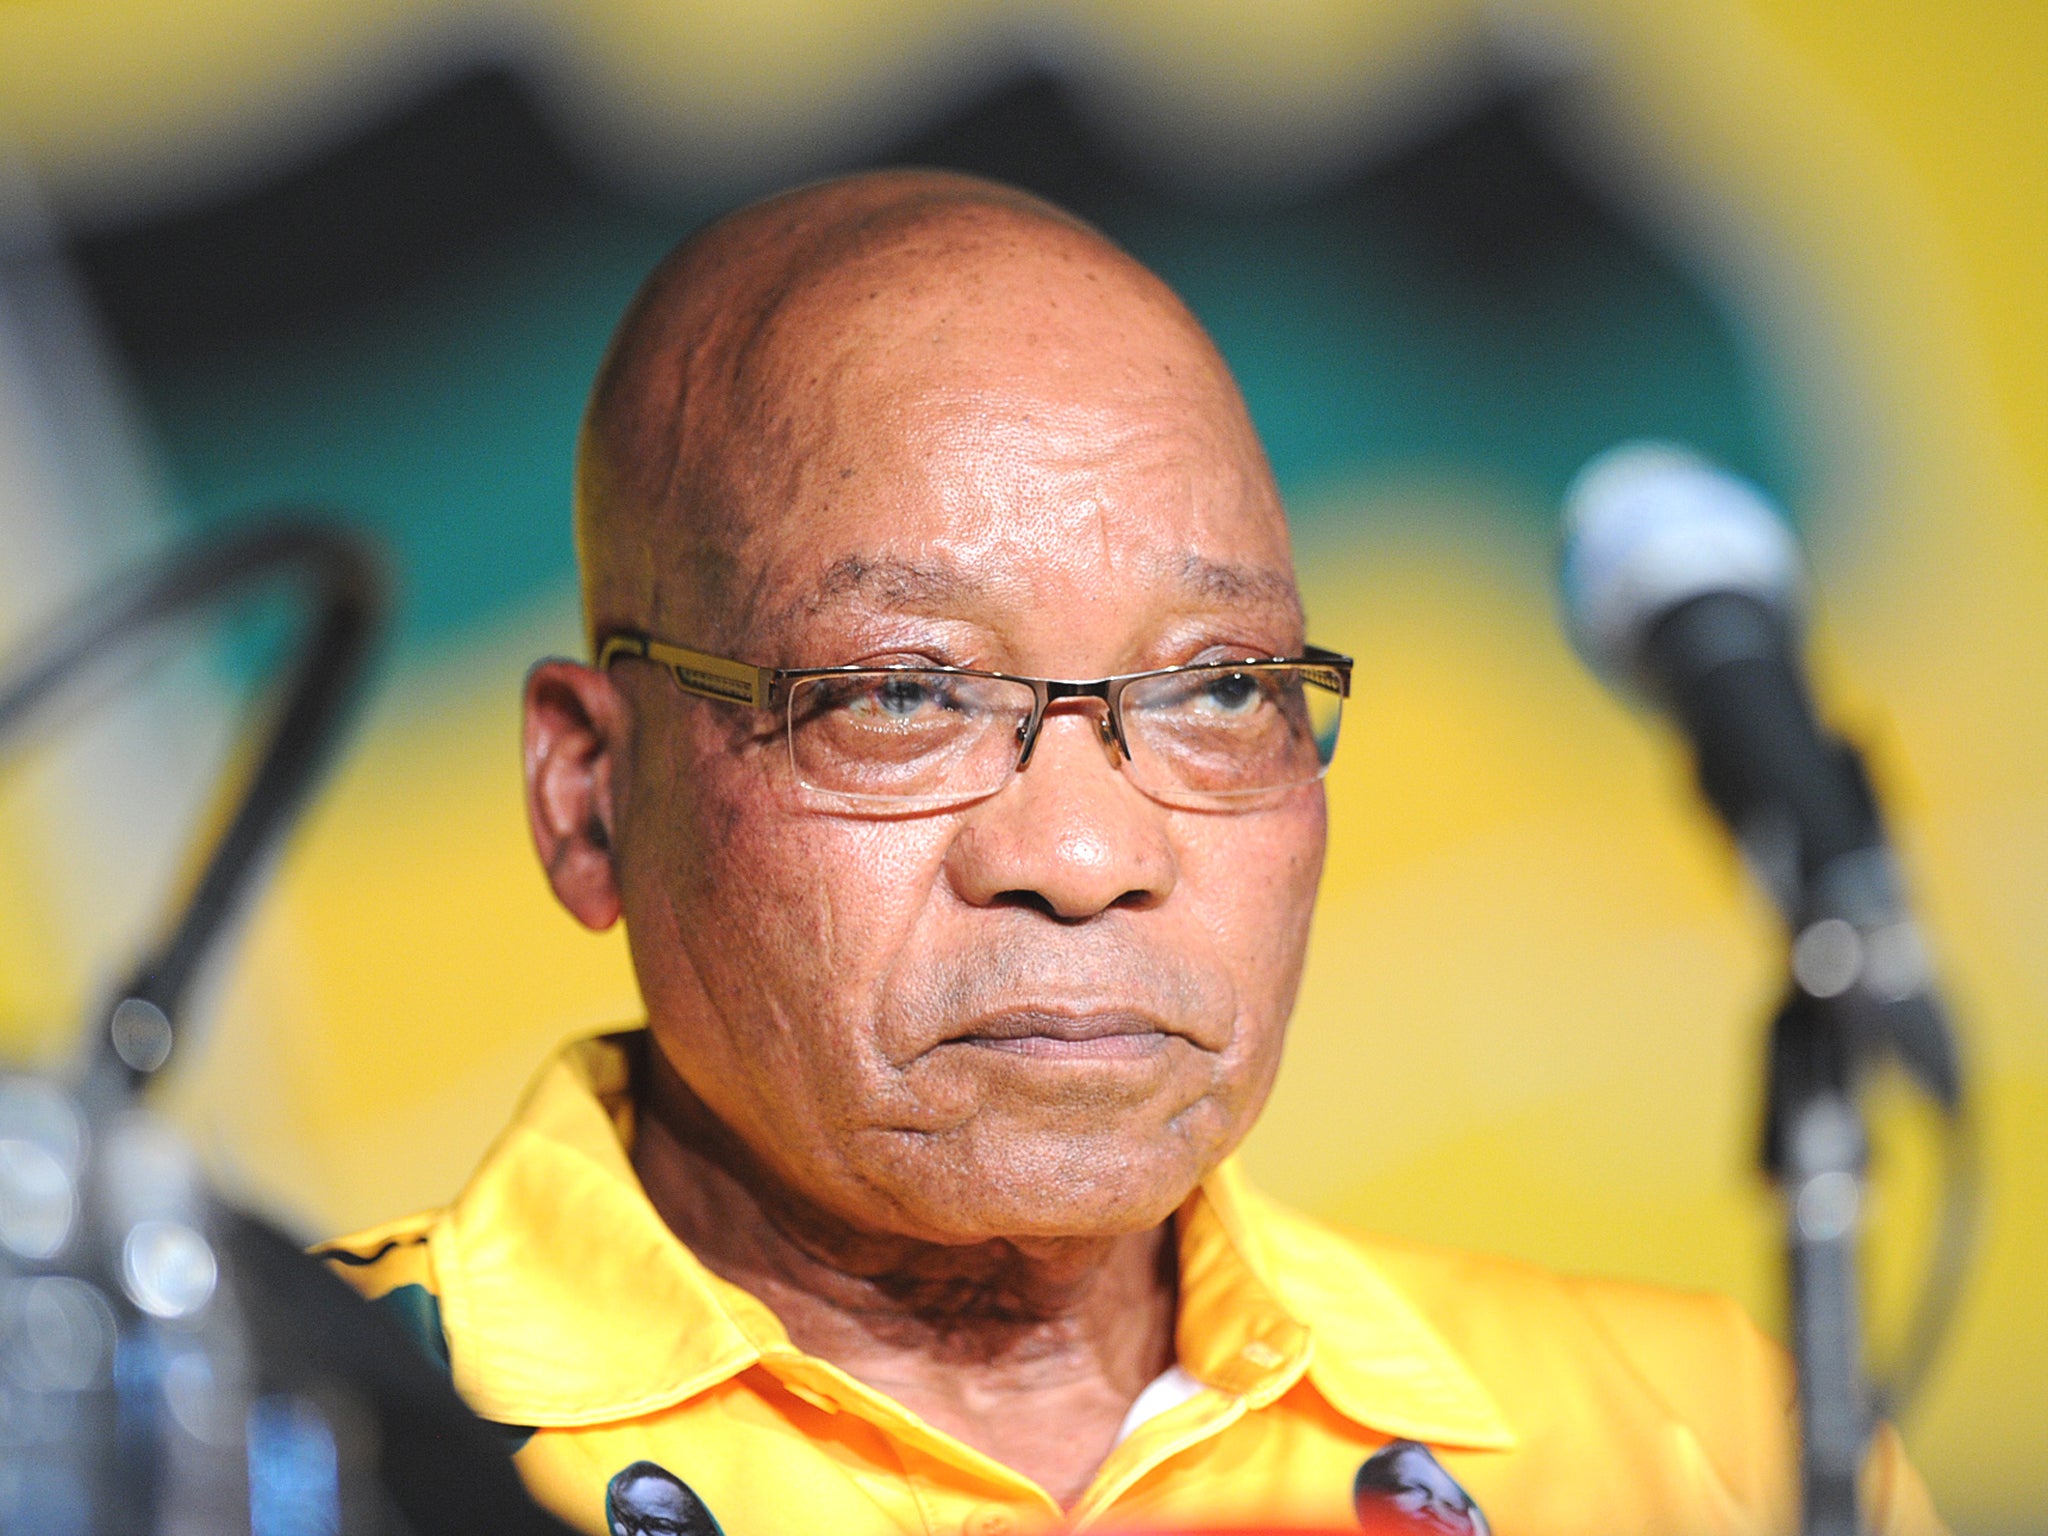 The ANC conference is set to give Zuma a second mandate to lead the party